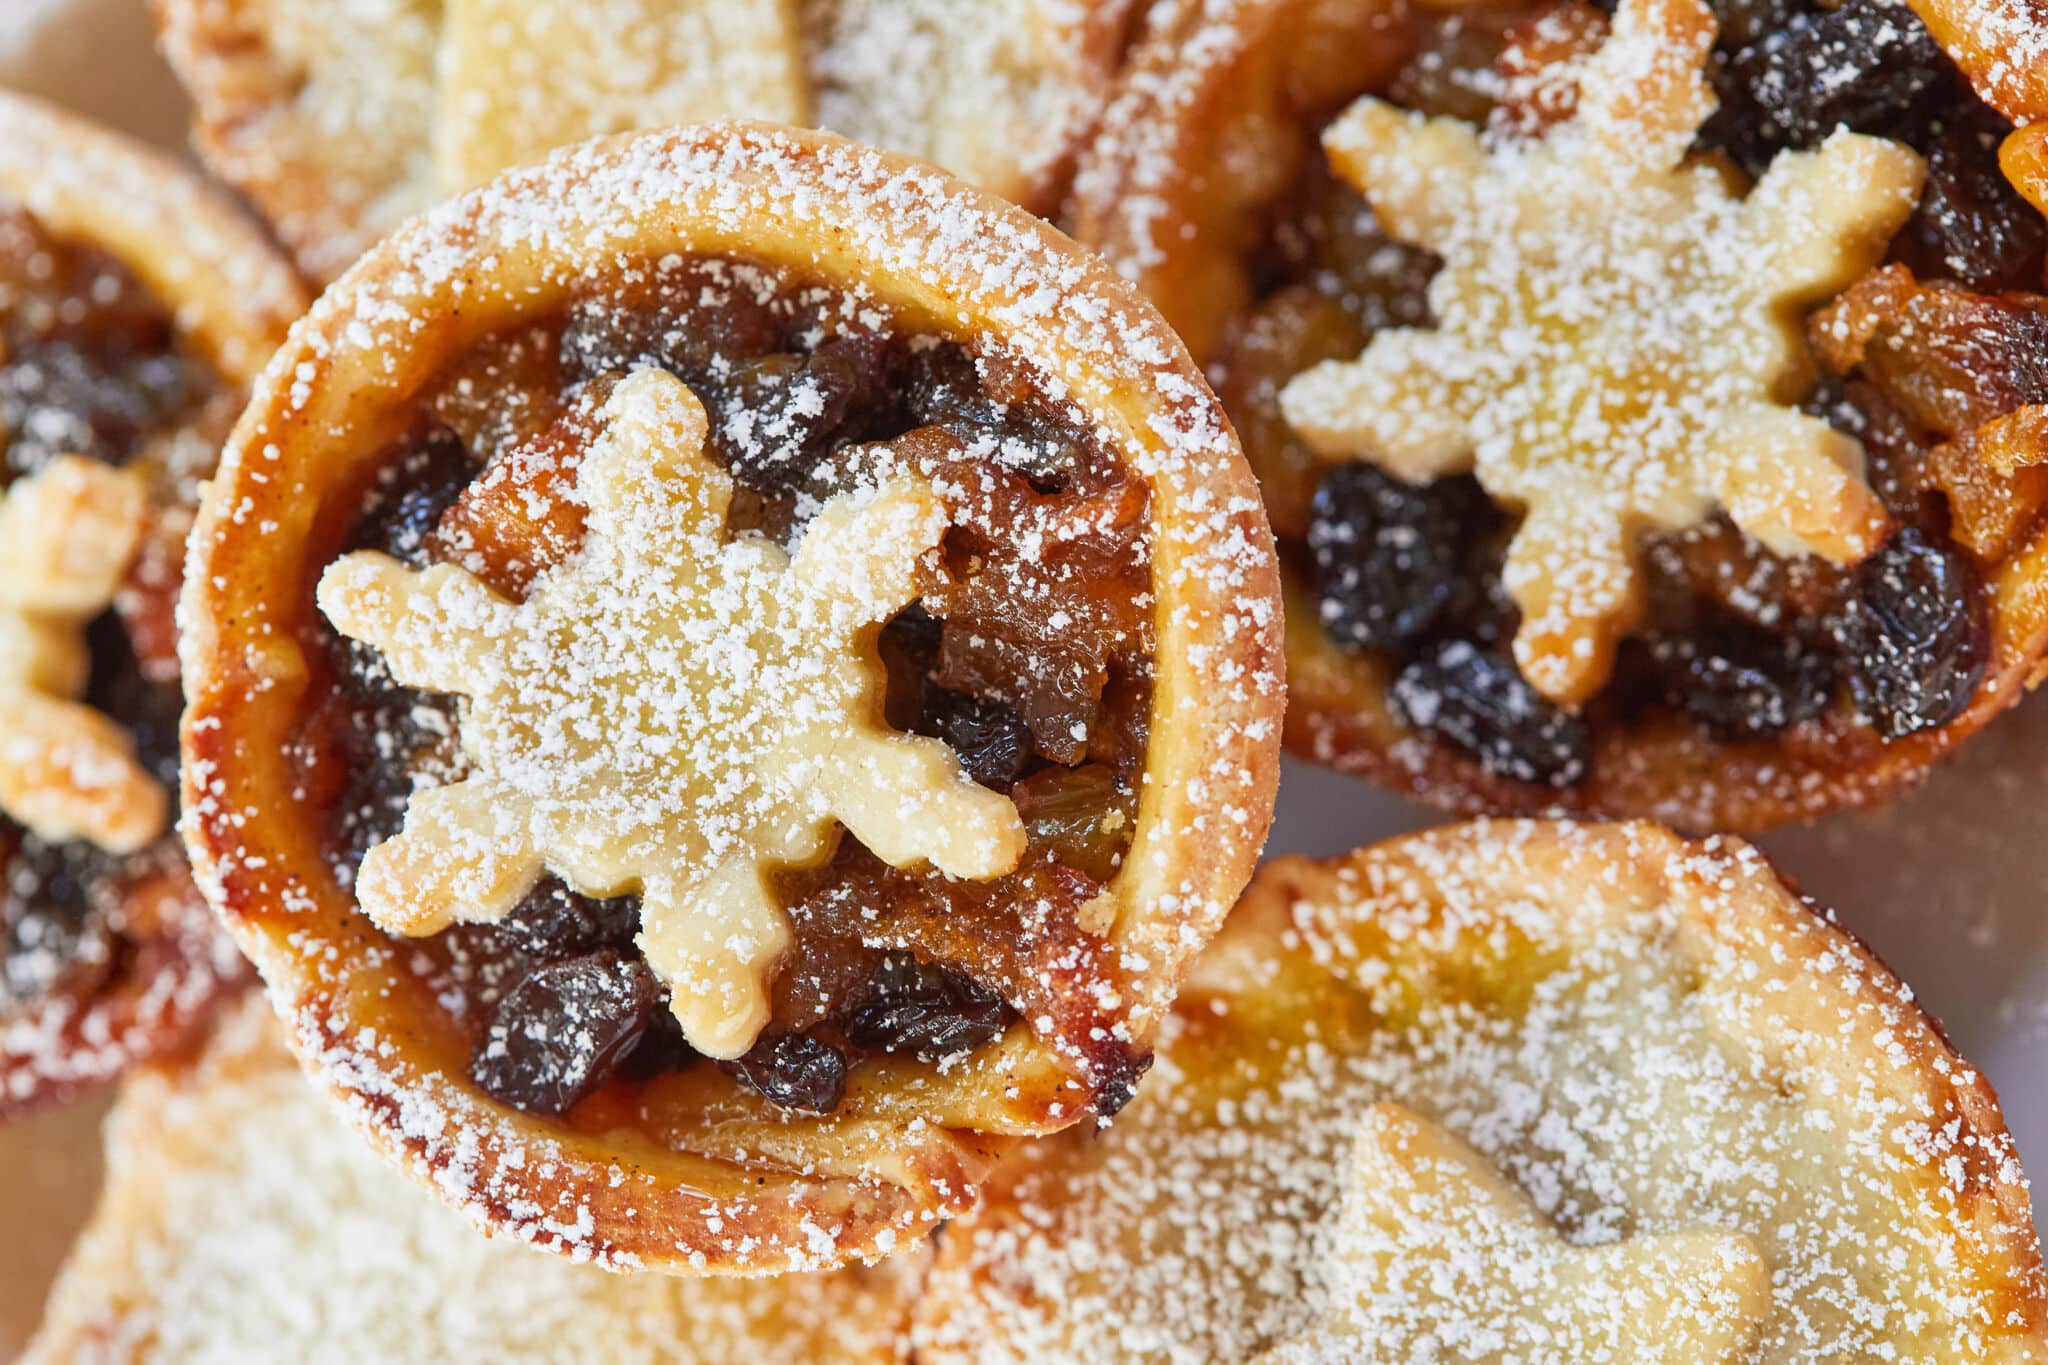 Traditional Irish Mince Pies have golden flaky pastry and slightly moist, chewy, and perfectly sticky mincemeat, dusted with powdered sugar. The top crust are shaped into snow flakes or stars.